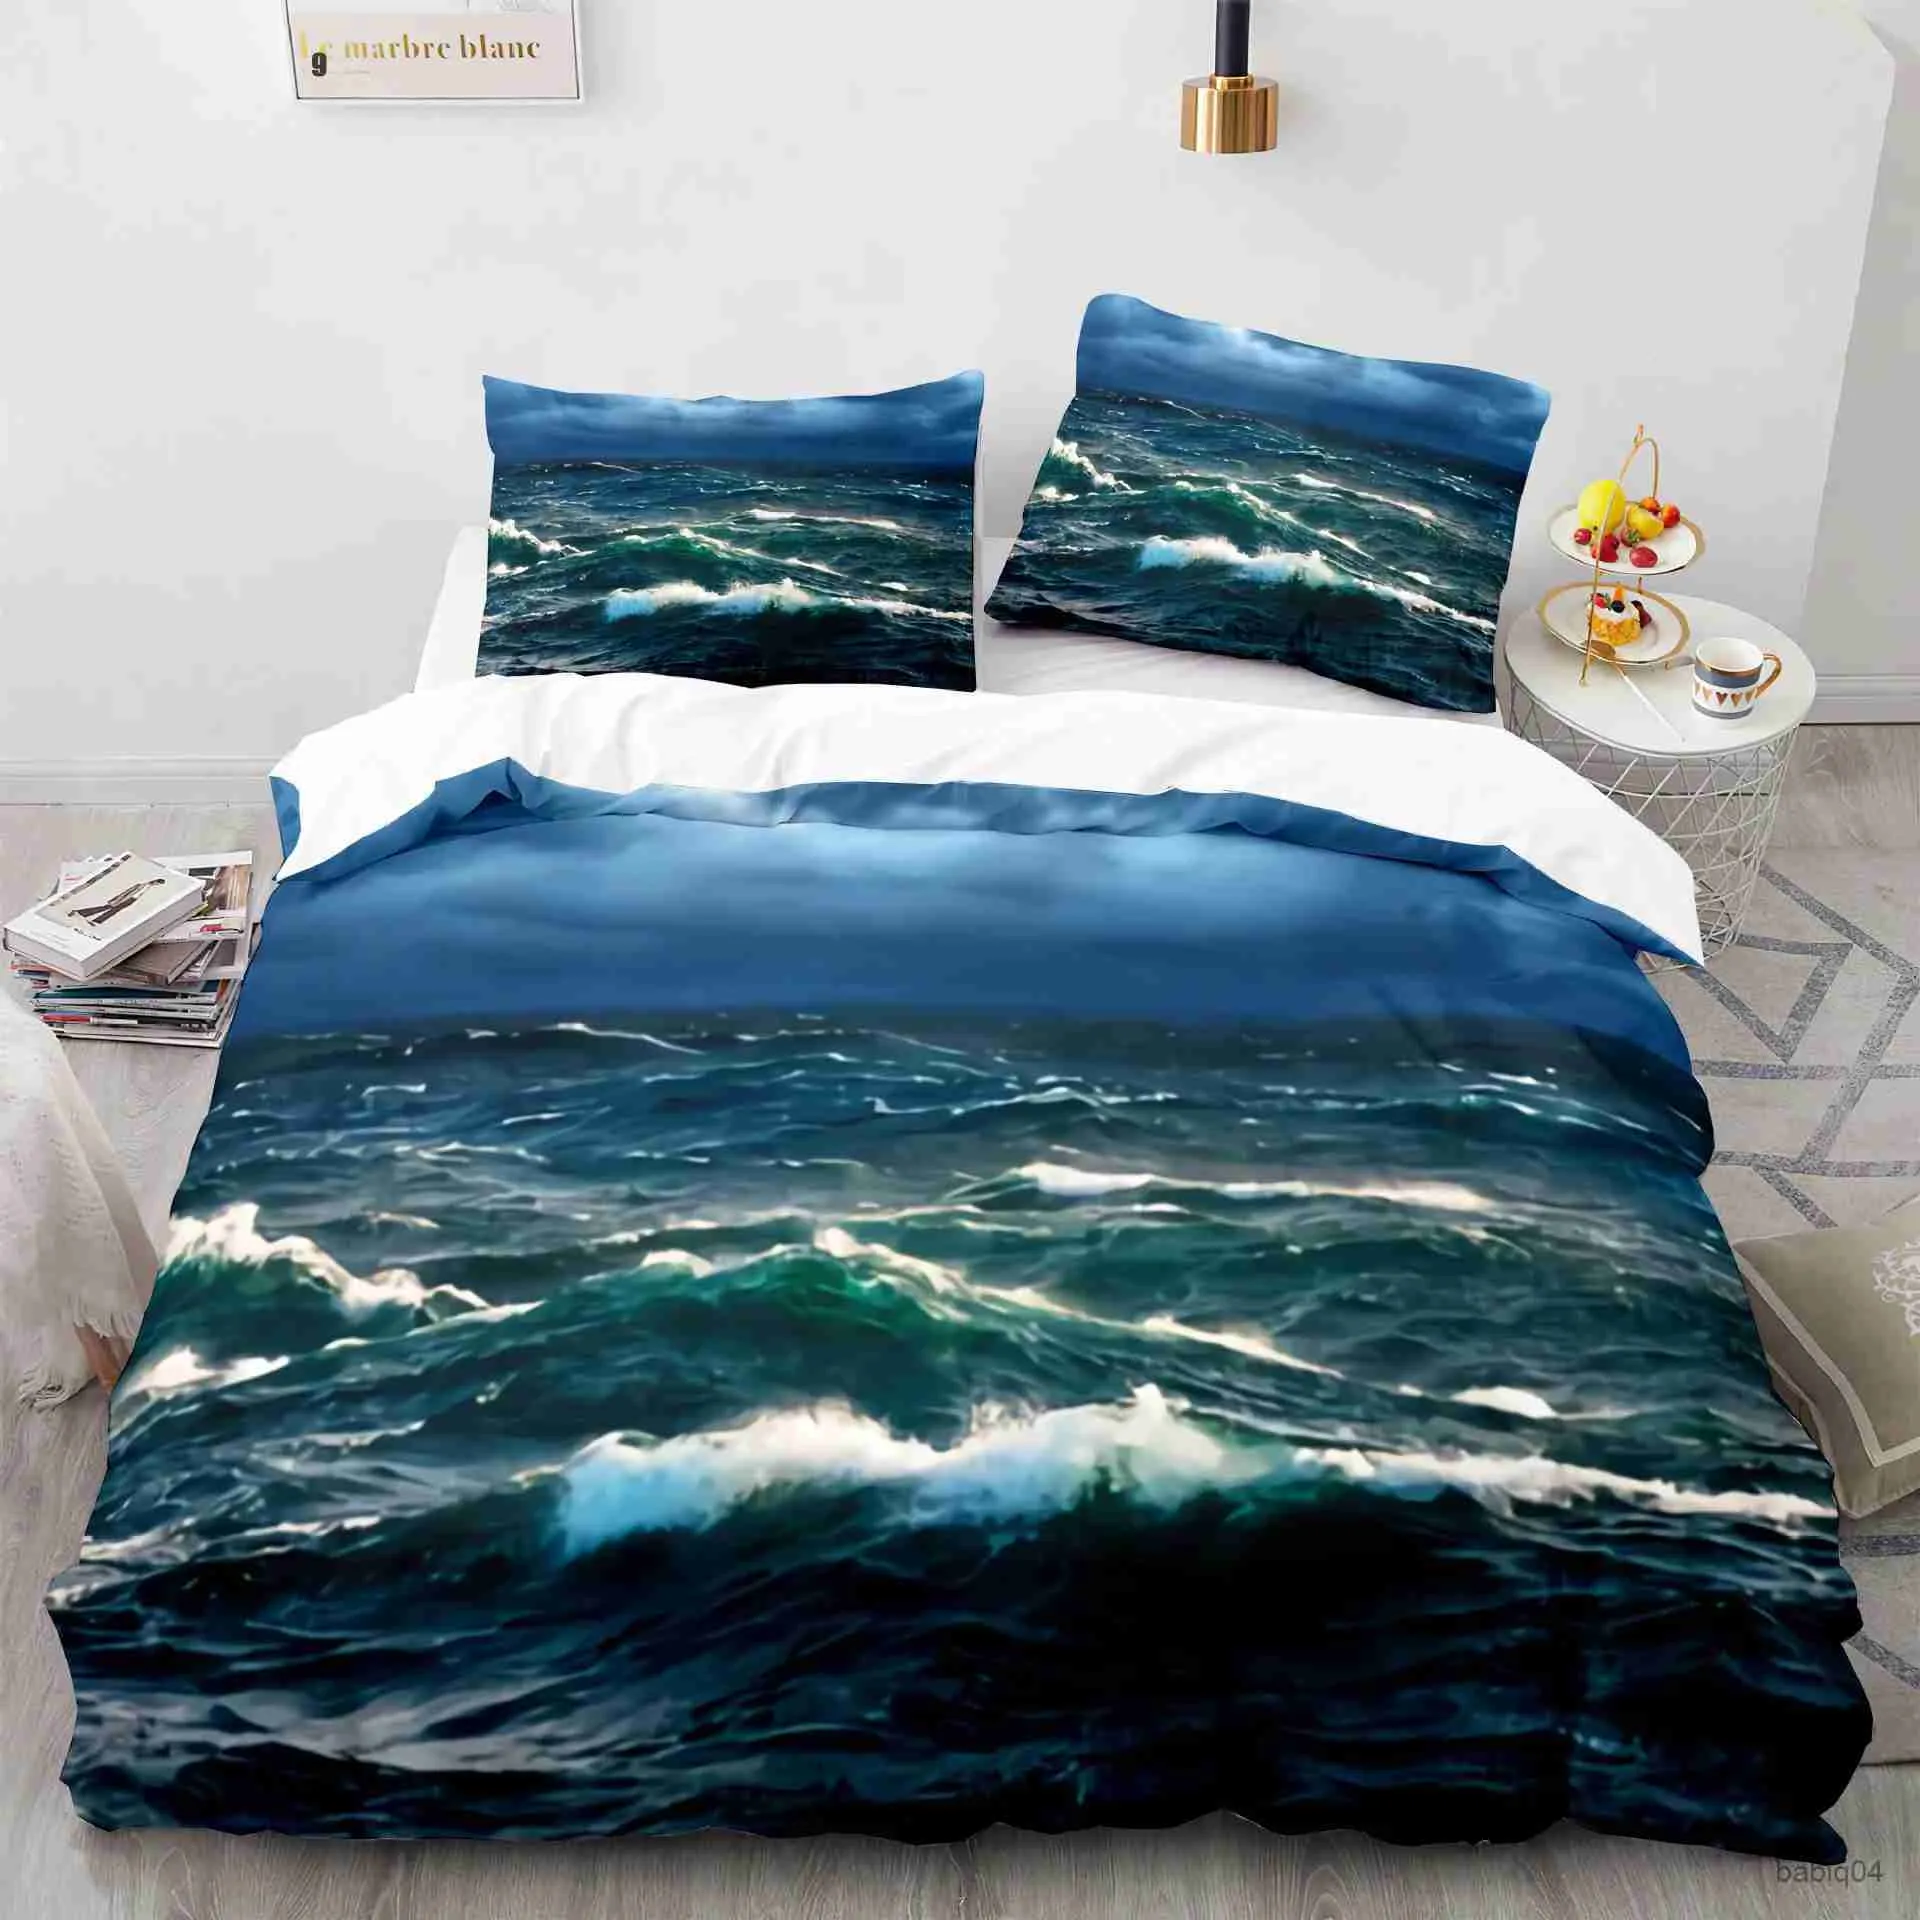 Bedding sets Sea Wave Duvet Covers Beach Rainbow Bedding Set Seaside Comforter Cover Queen/King/Full/Twin Size Quilt Cover for Girls Boys